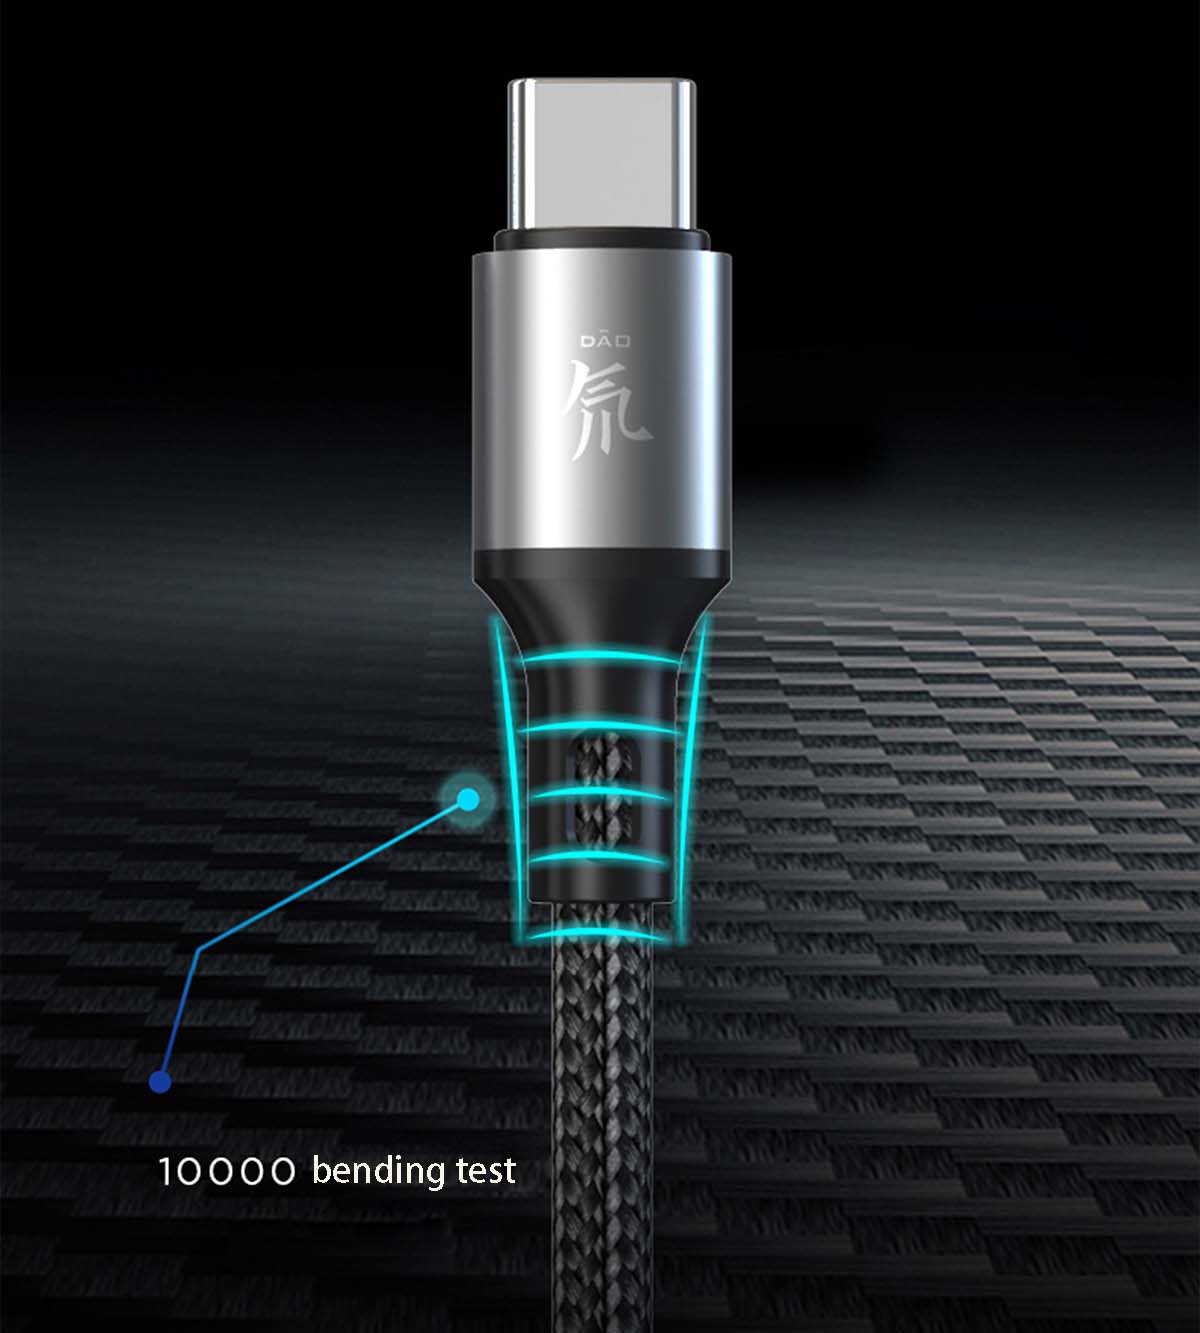 Nubia C2C 6A Max 120W Braided Fast Charge Data Cable